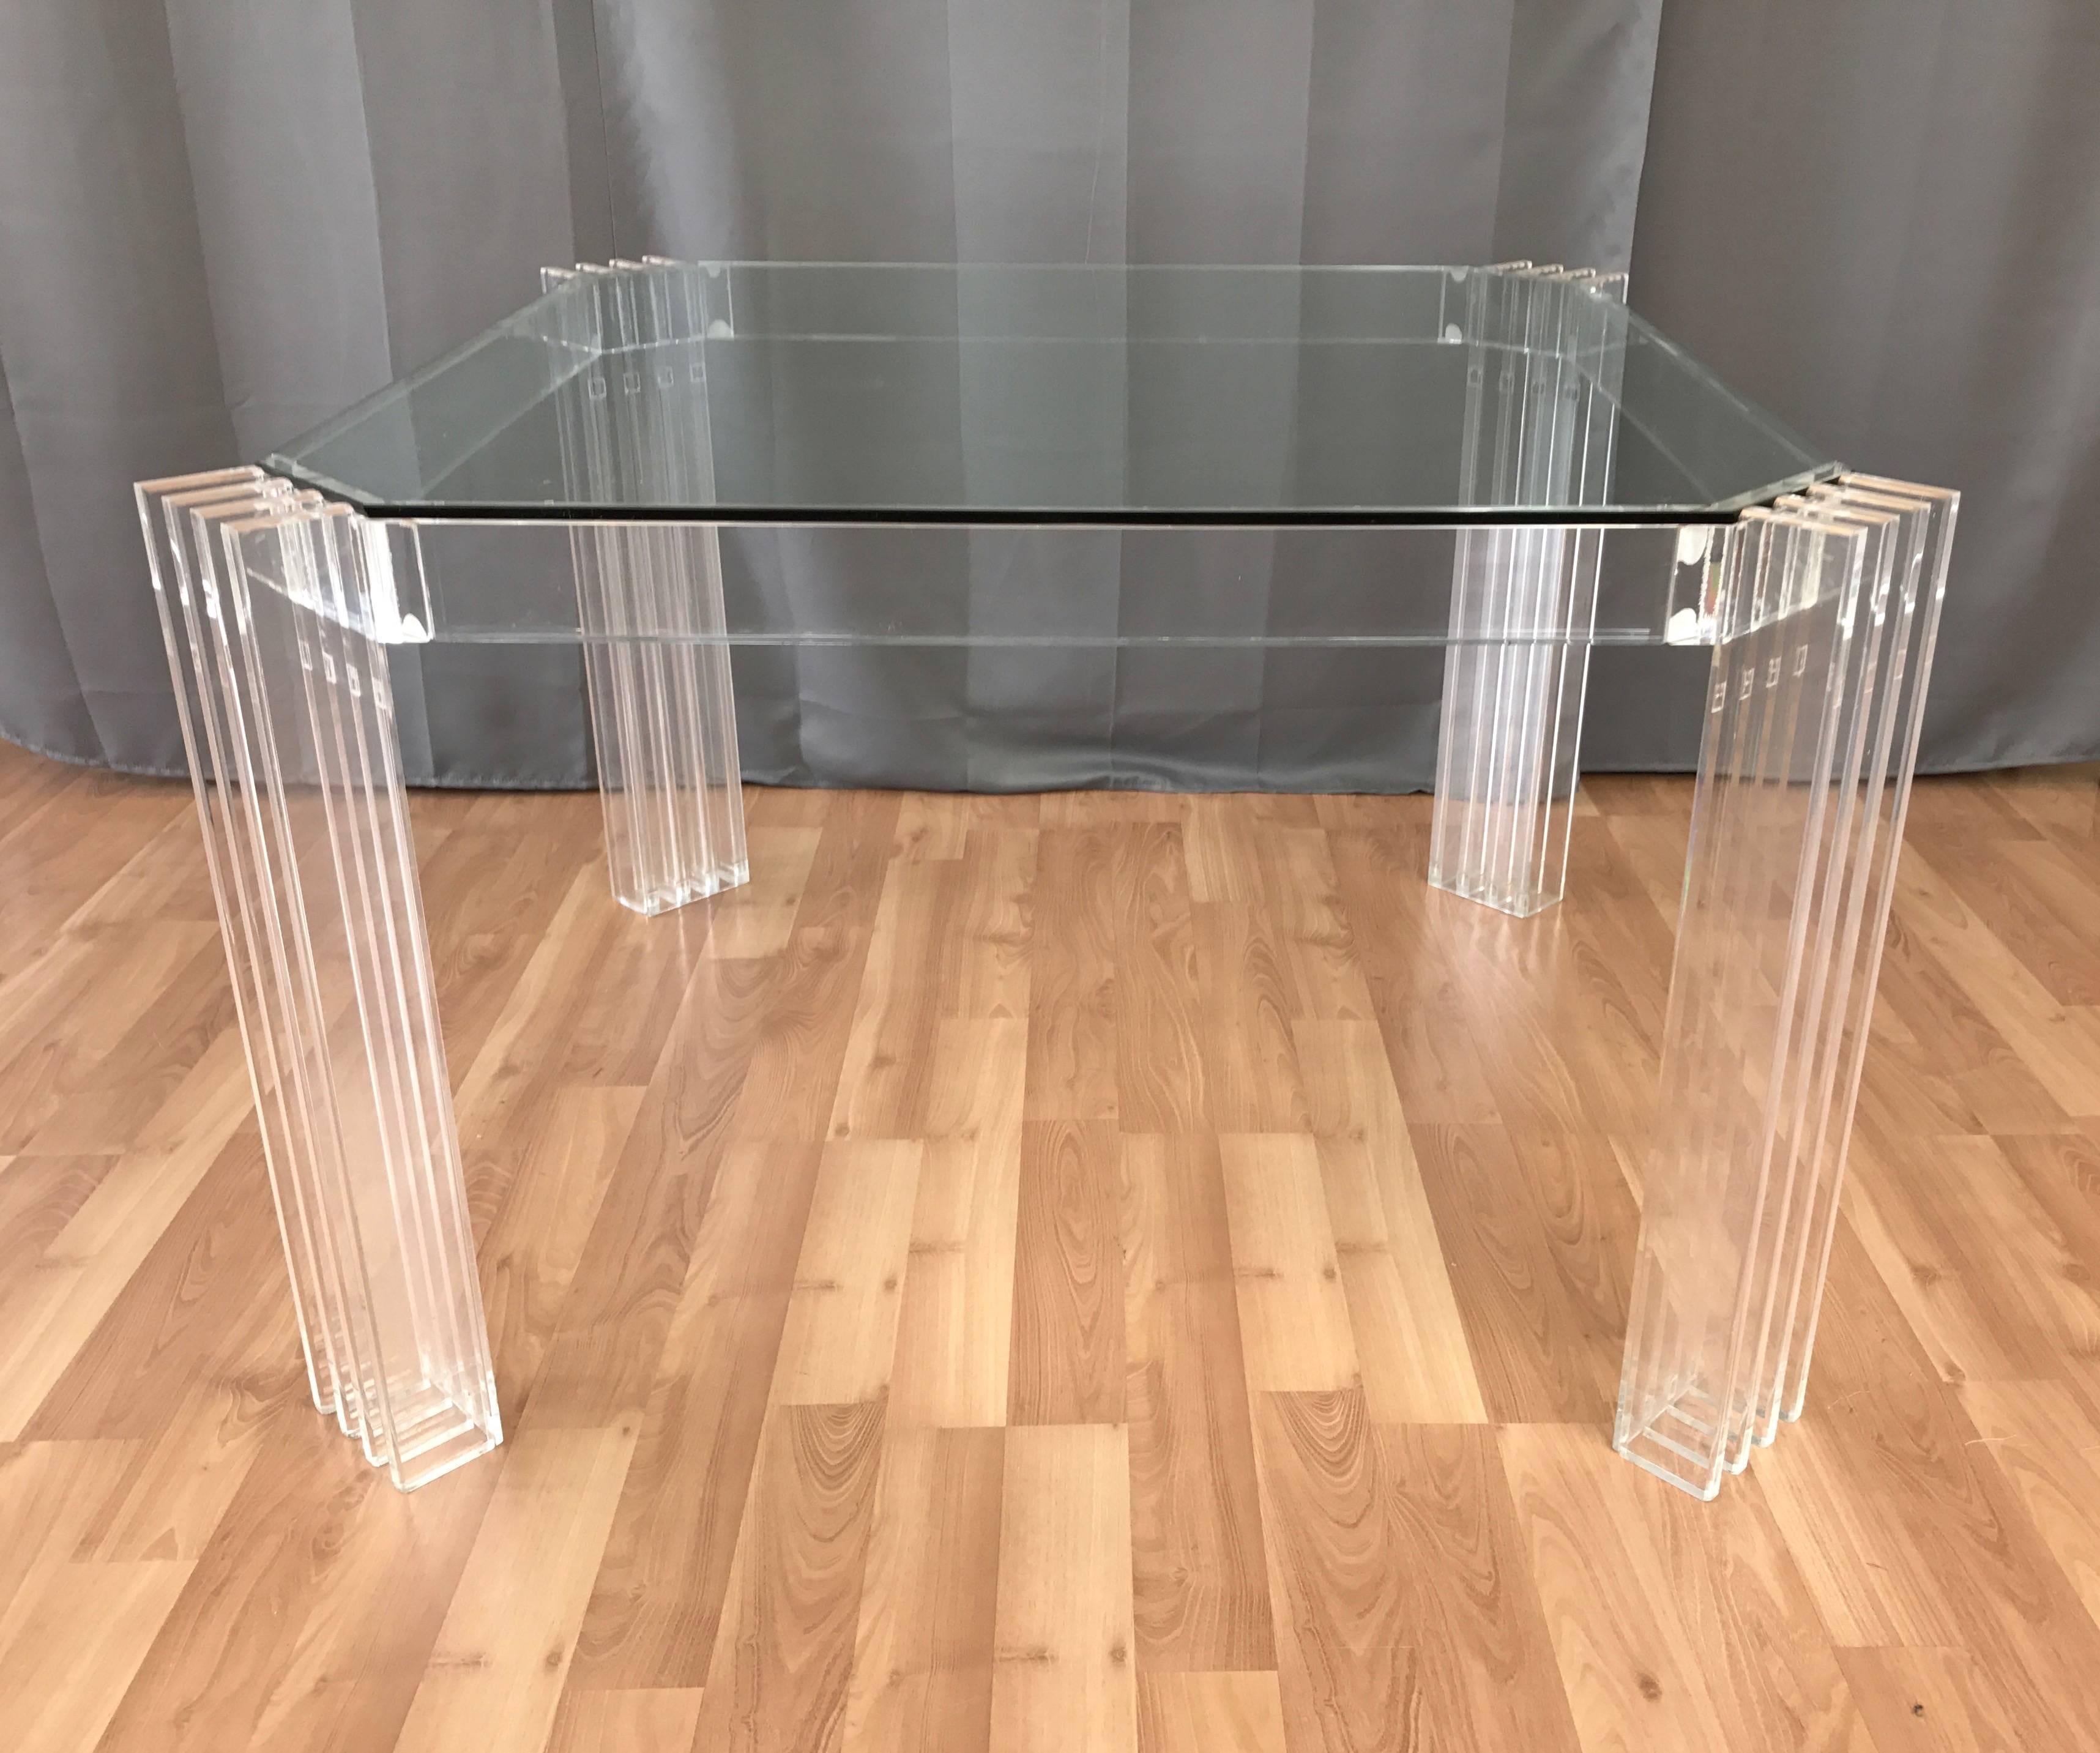 A striking 1970s square Lucite dining table or large game table with glass top by Charles Hollis Jones.

Uncommon and impeccably executed design is effortlessly contemporary, with no metal hardware to detract from its crystal clear appearance.